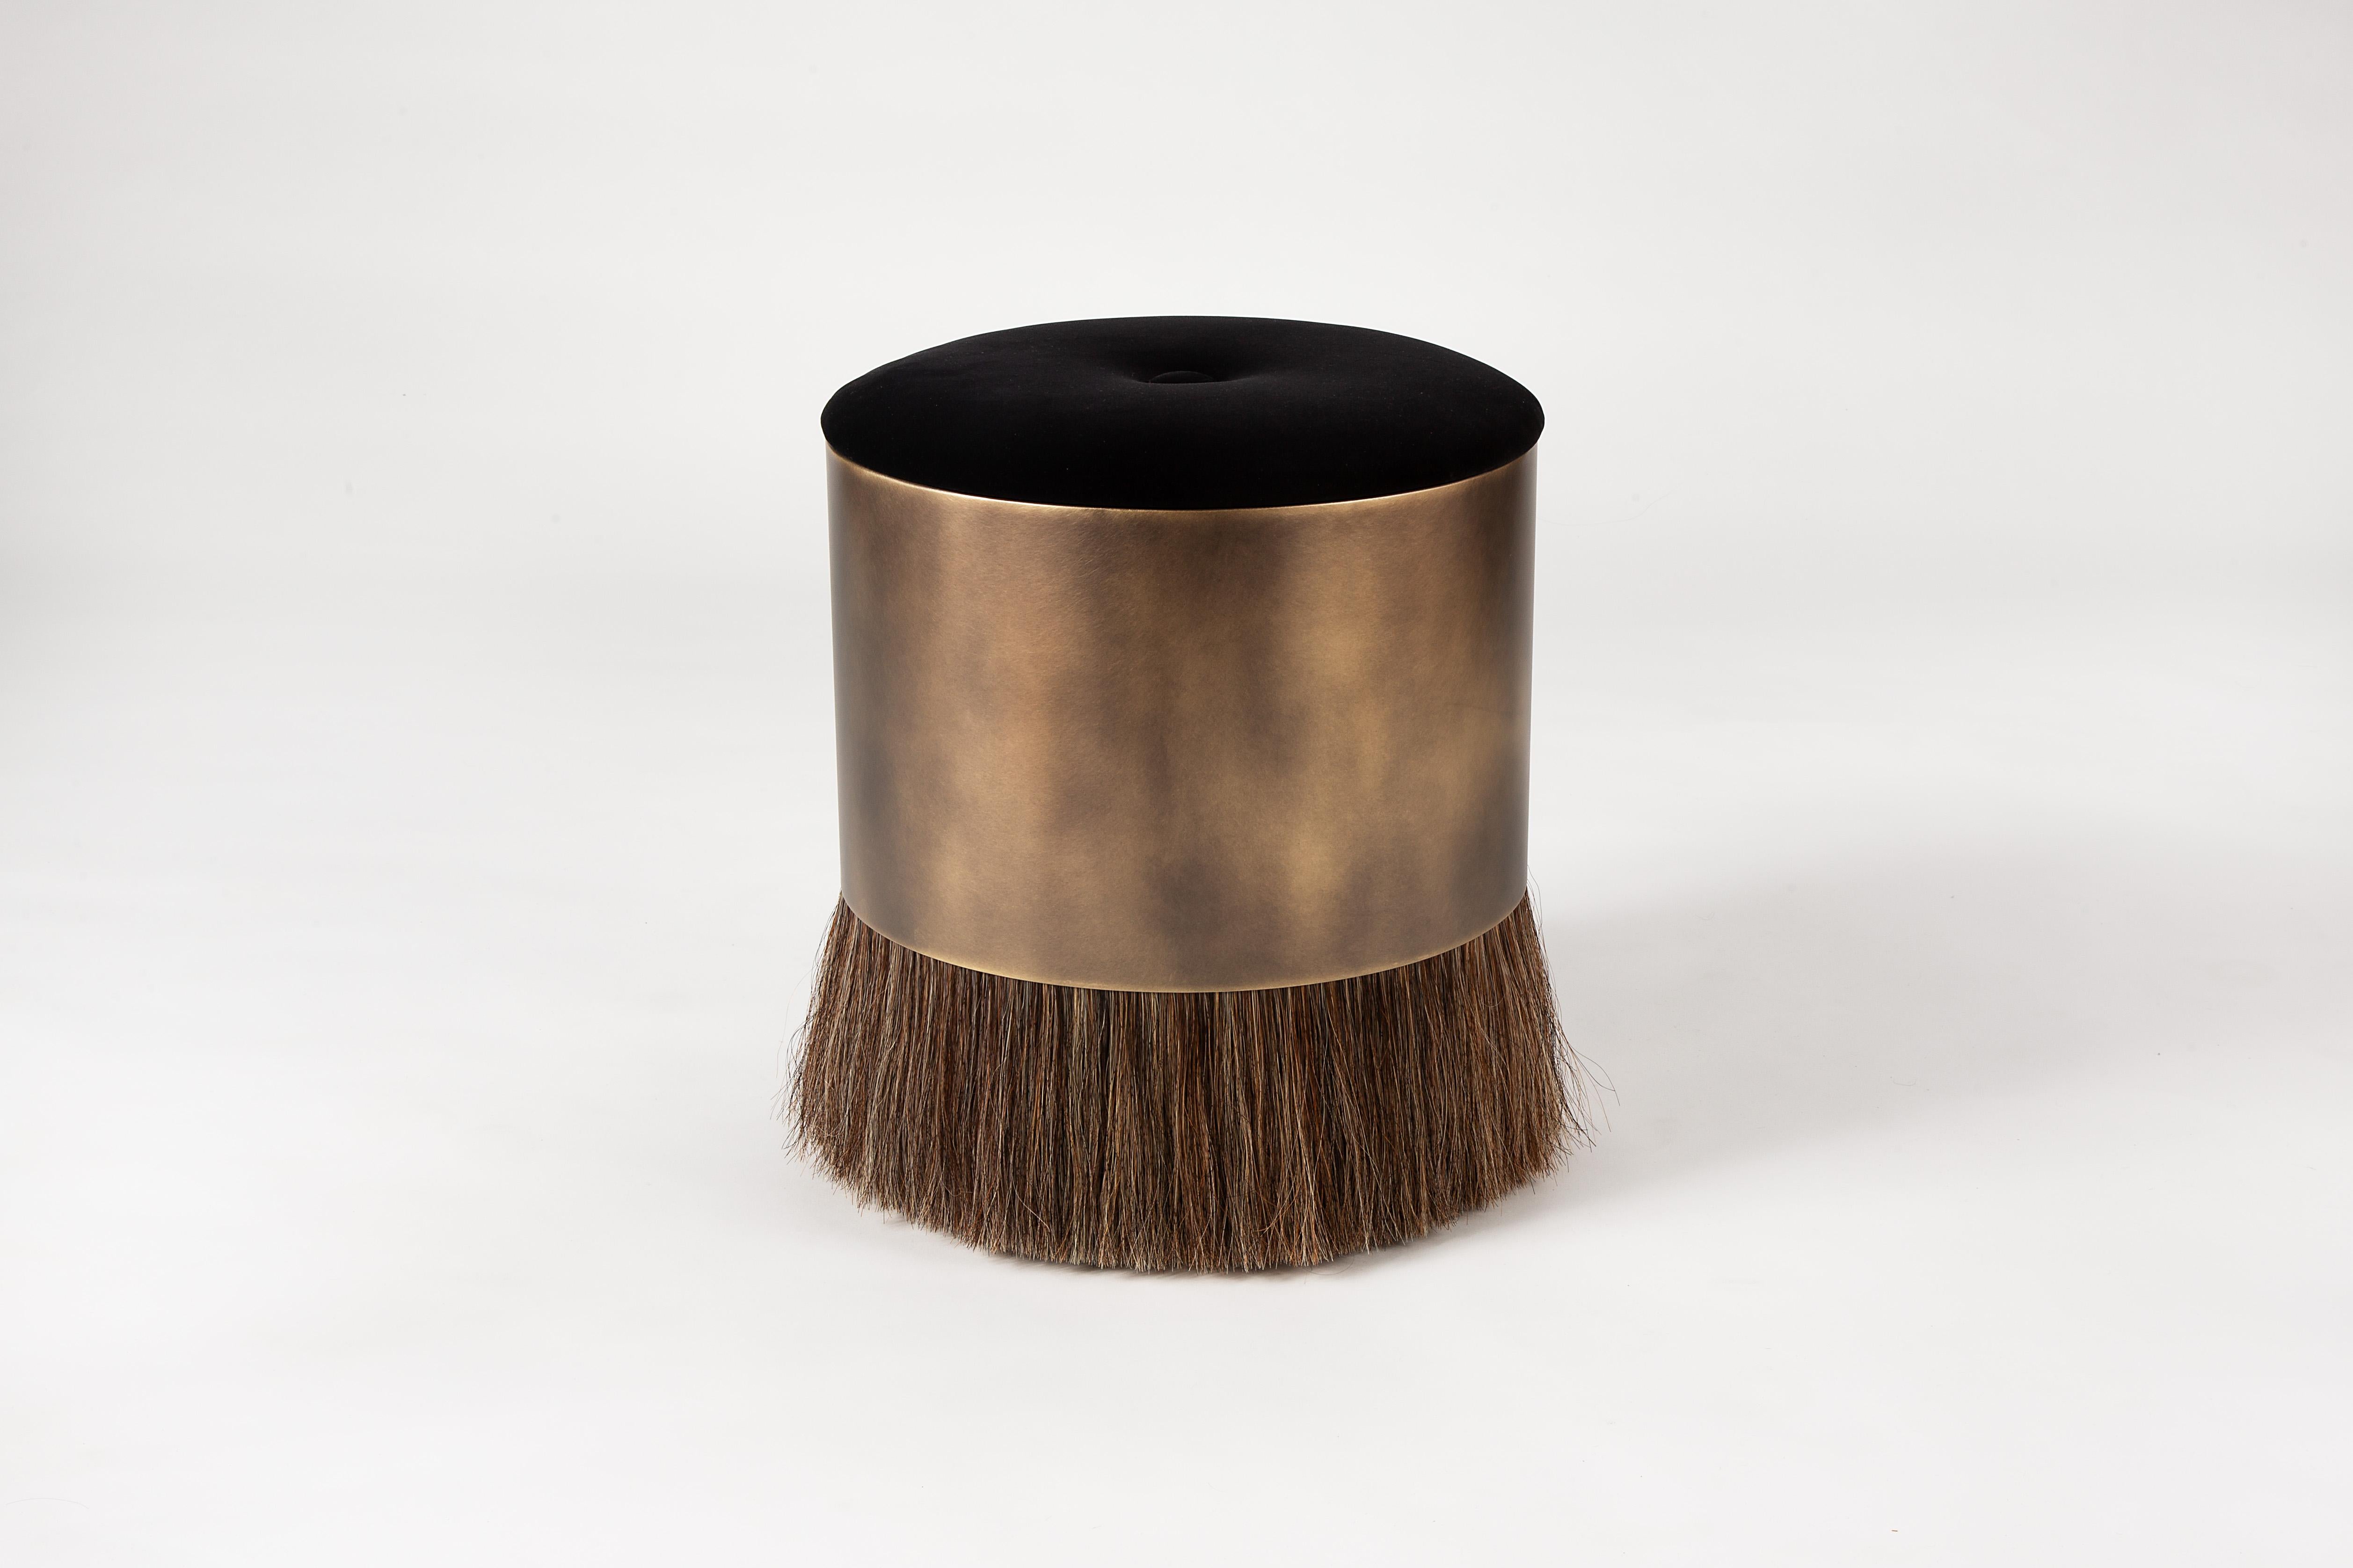 The Thing 4 Stool features a luxuriously upholstered top, a brass-plated steel drum and horse hair. Refined yet wild, Konekt's signature Thing Stools are available in four different styles. 

The Thing 4 is available on a made to order basis with